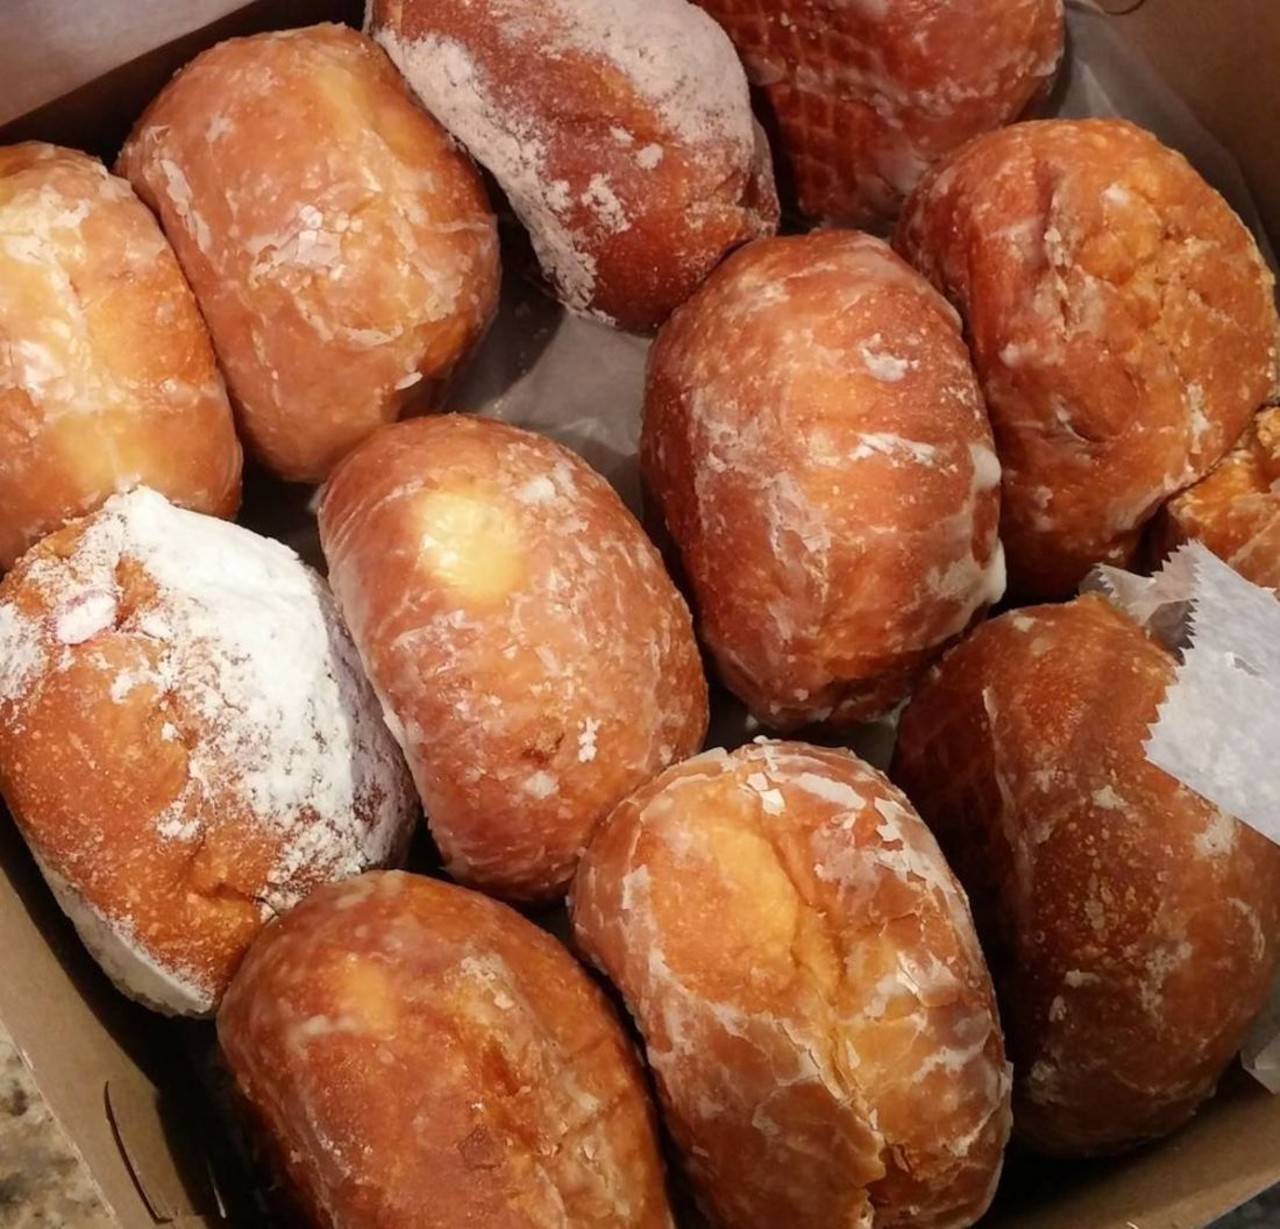 Big City Small World Bakery
Located just west of downtown Ann Arbor, this place is hard to miss &#151; the building is bright orange after all. The paczki here are traditional and tasty. 
500 Miller Ave., Ann Arbor; 734-668-7688. Photo via Instagram user joshwoodwardmusic.